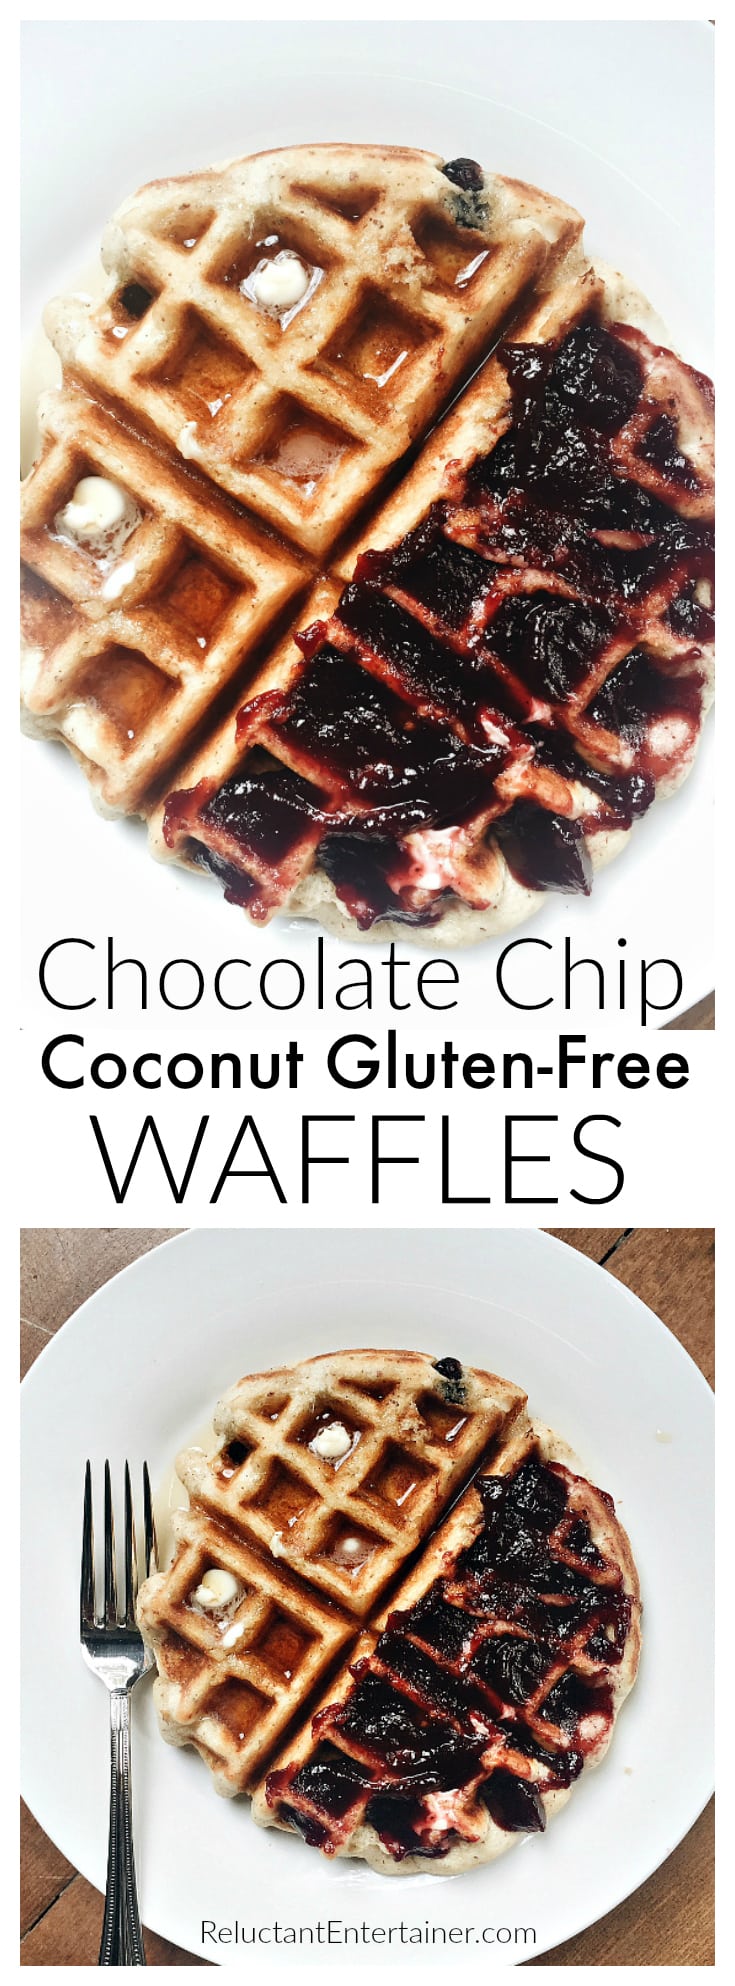 Chocolate Chip Coconut Gluten-Free Waffles are made with Pamela's baking mix, delicious to serve for any breakfast, brunch, or dinner!